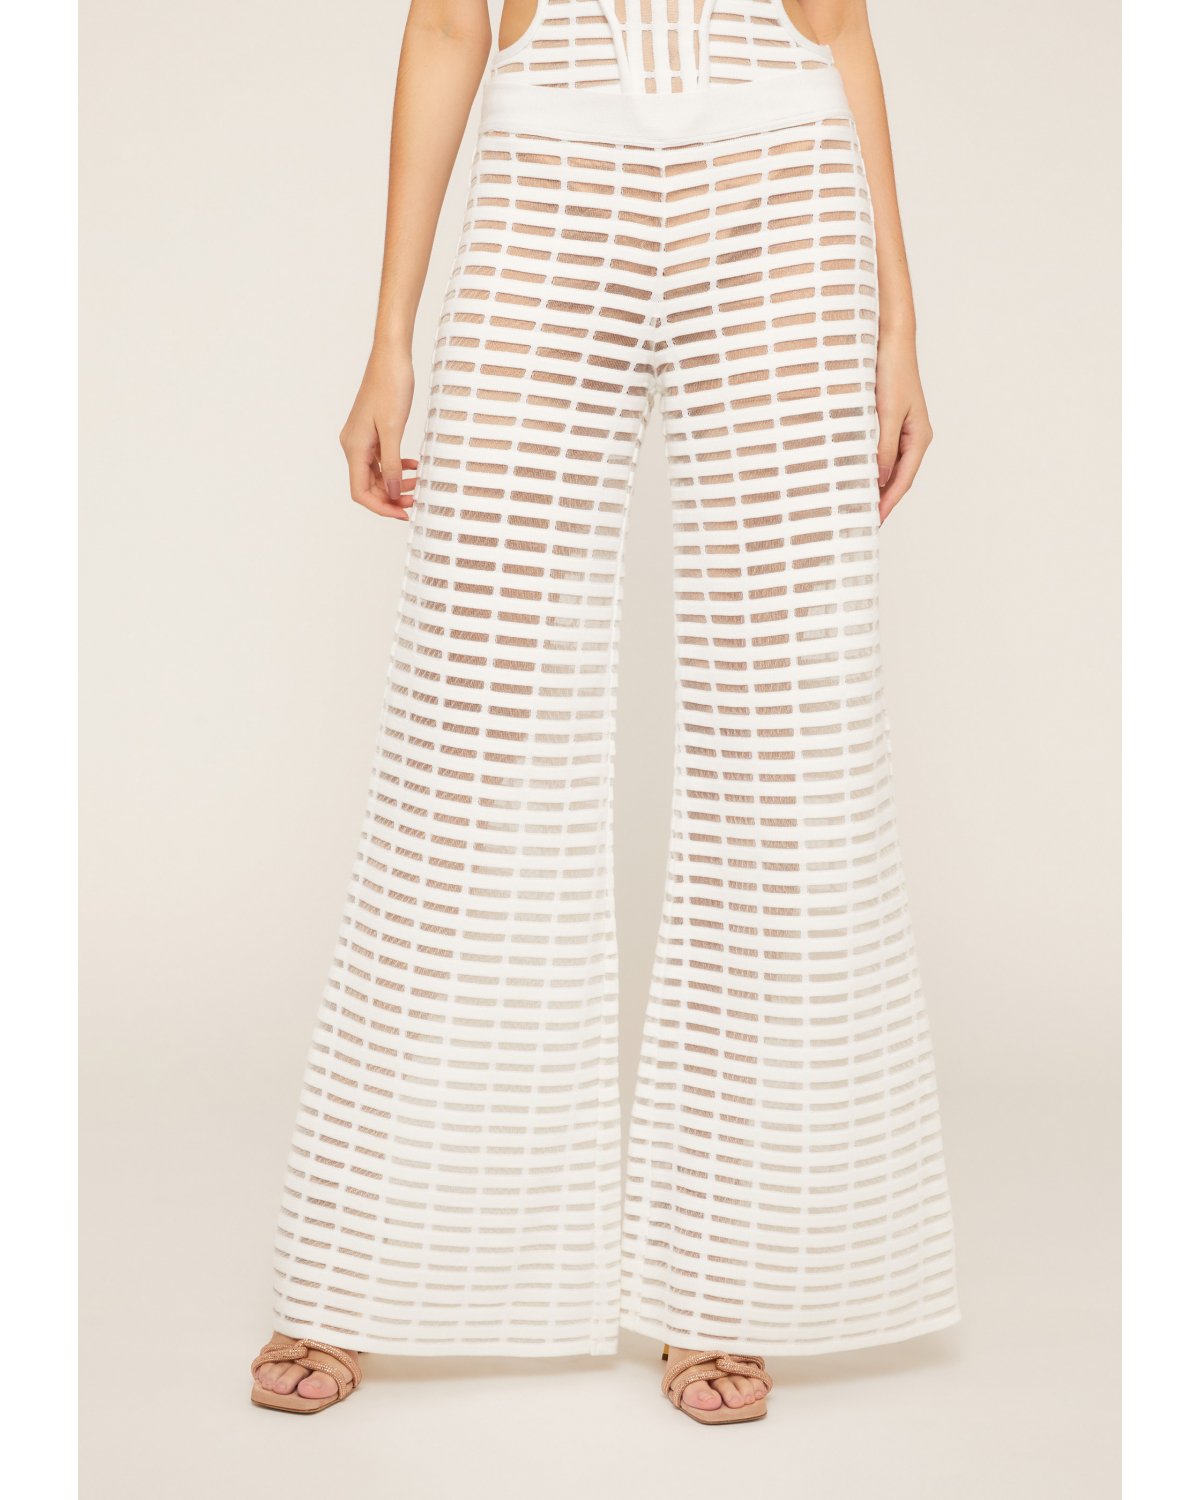 White open-knit pants | Iconic Capsule Collection, 73_74 | Genny